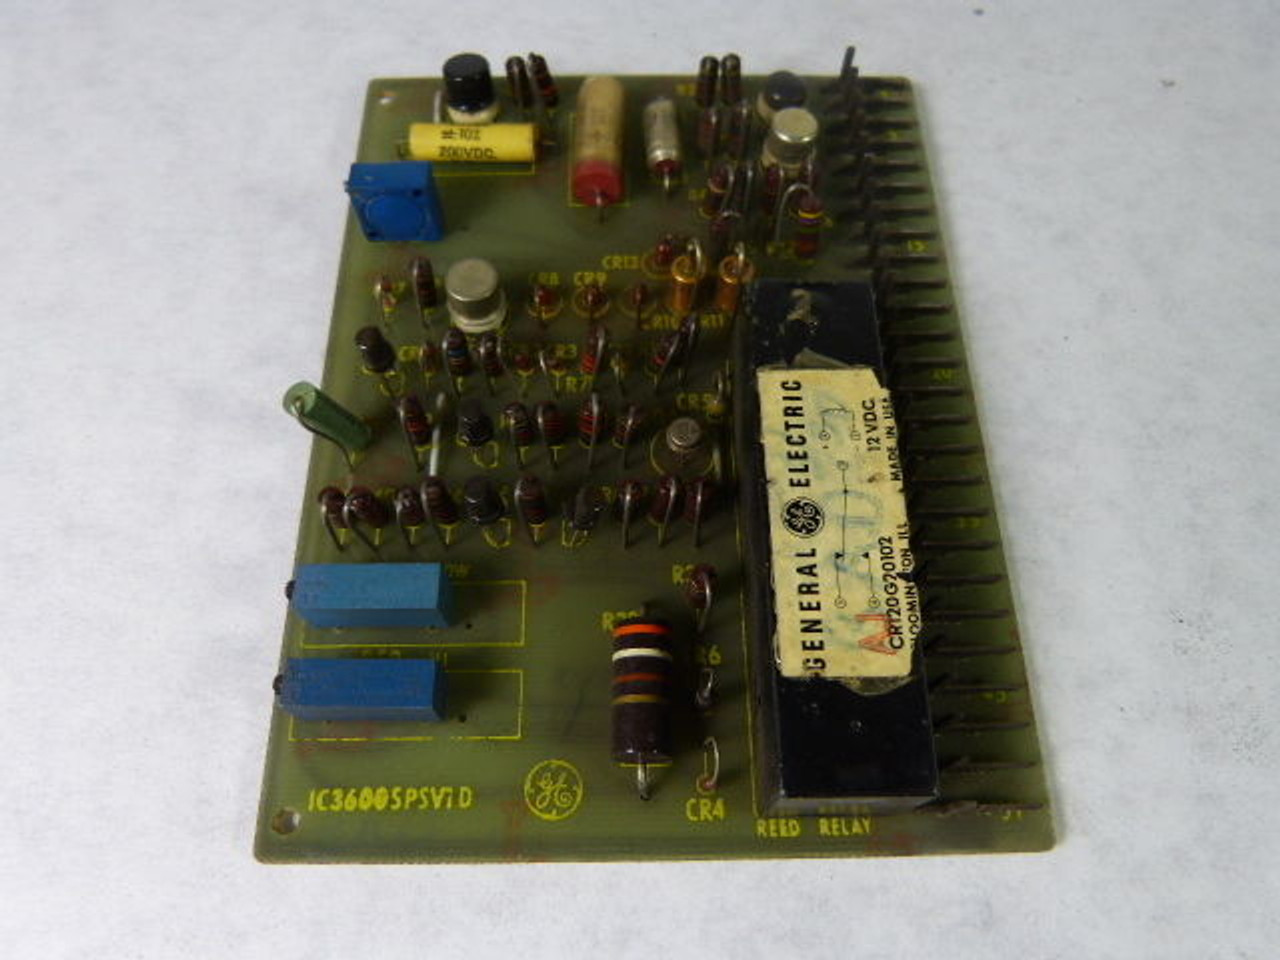 GE Fanuc IC3600SPSV1D Speedtronic Assembly Control Board USED